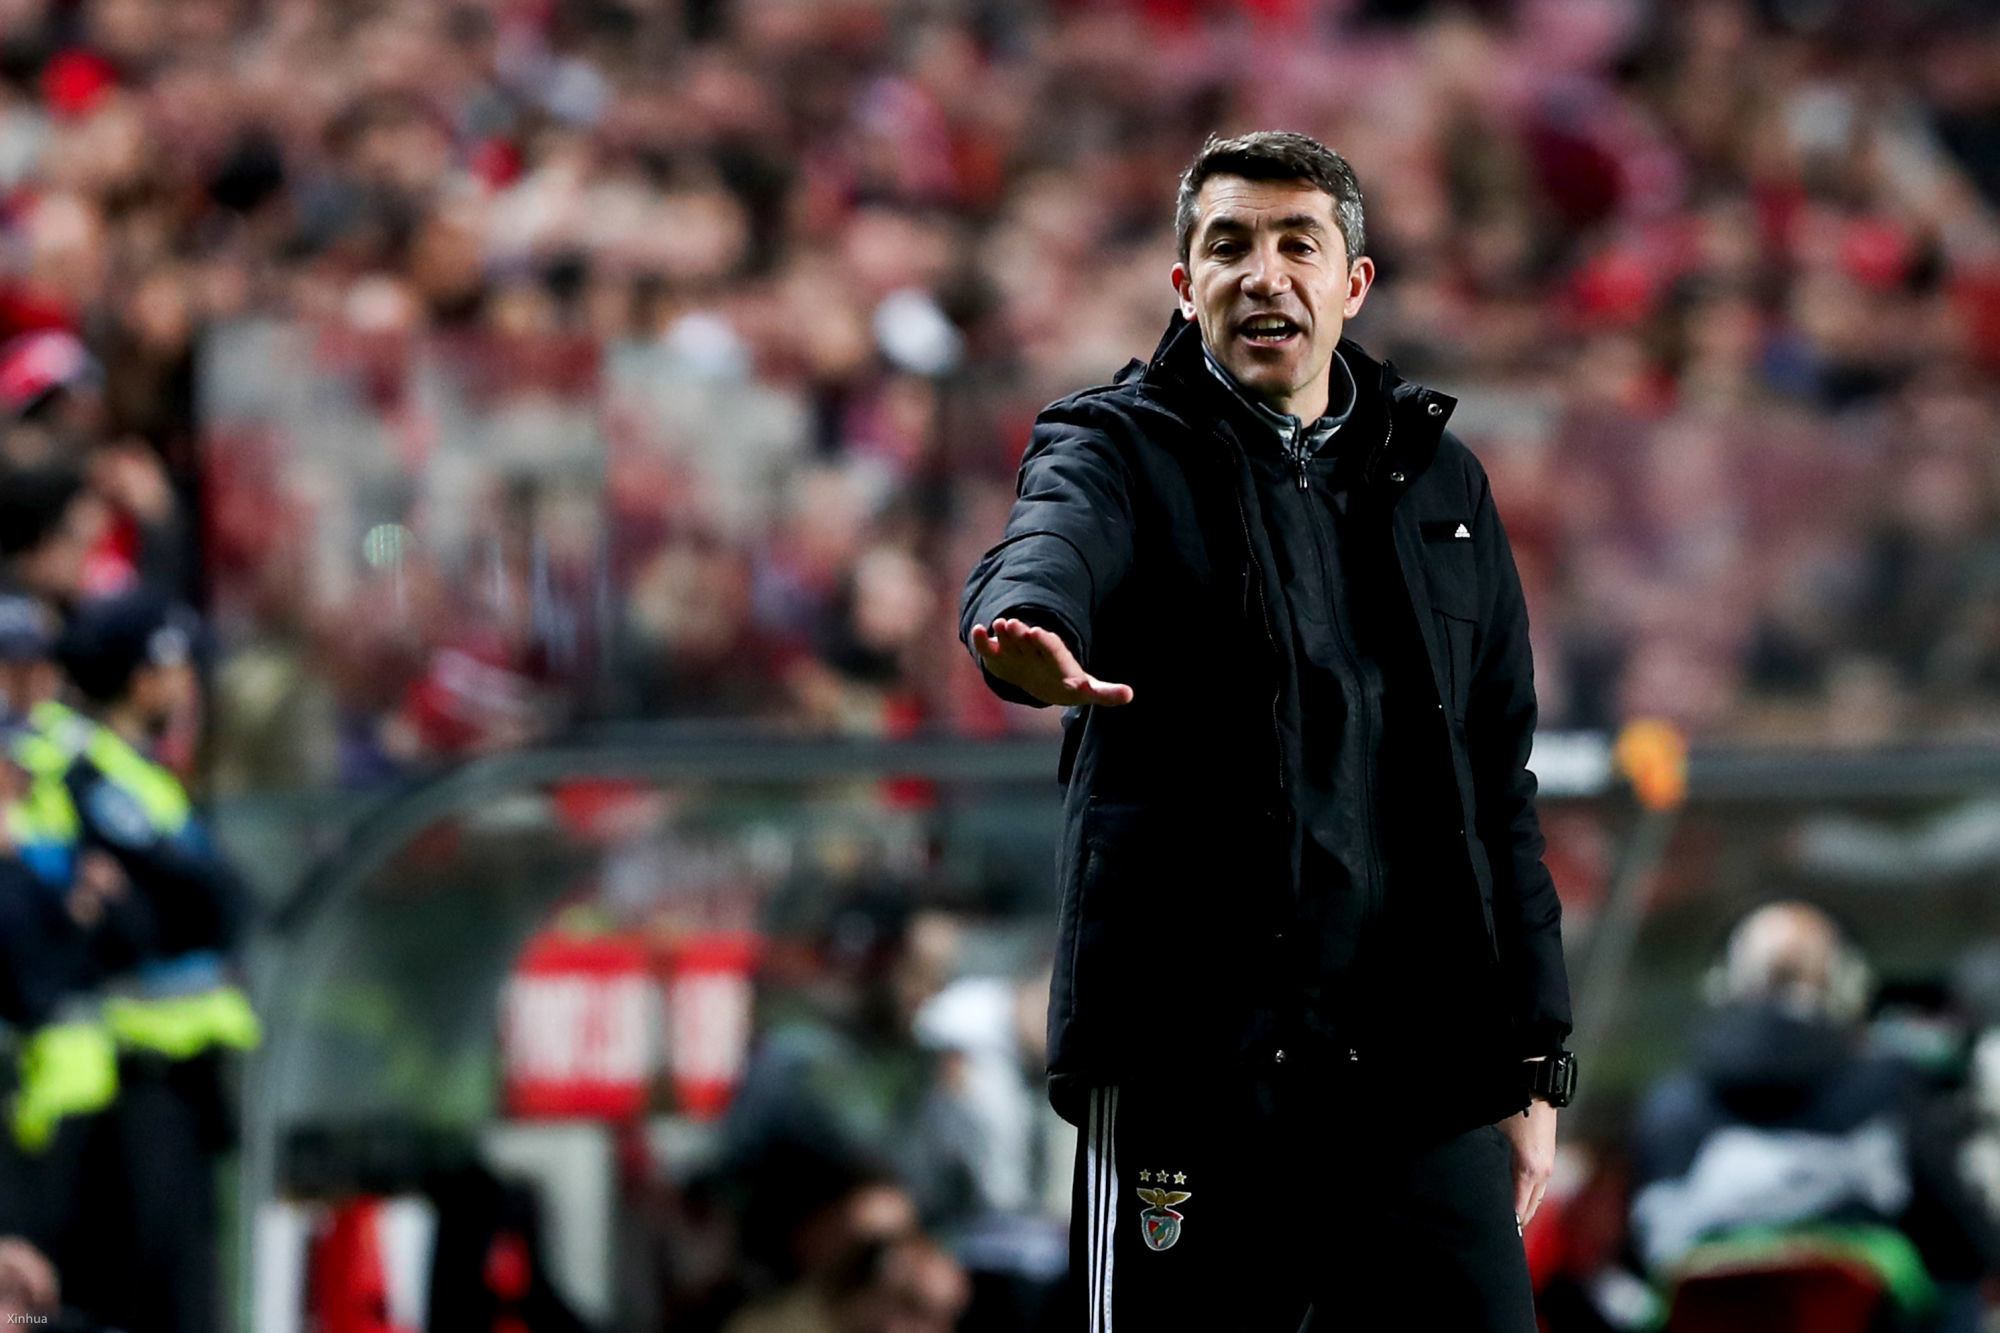 (200228) -- LISBON, Feb. 28, 2020 (Xinhua) -- Benfica's head coach Bruno Lage gestures during the UEFA Europa League round of 32 second leg football match between SL Benfica and Shakhtar Donetsk in Lisbon, Portugal, on Feb. 27, 2020. (Photo by Pedro Fiuza/Xinhua) (Photo by Xinhua/Sipa USA) 

Photo by Icon Sport - Bruno LAGE - Estàdio da Luz - Lisbonne (Portugal)